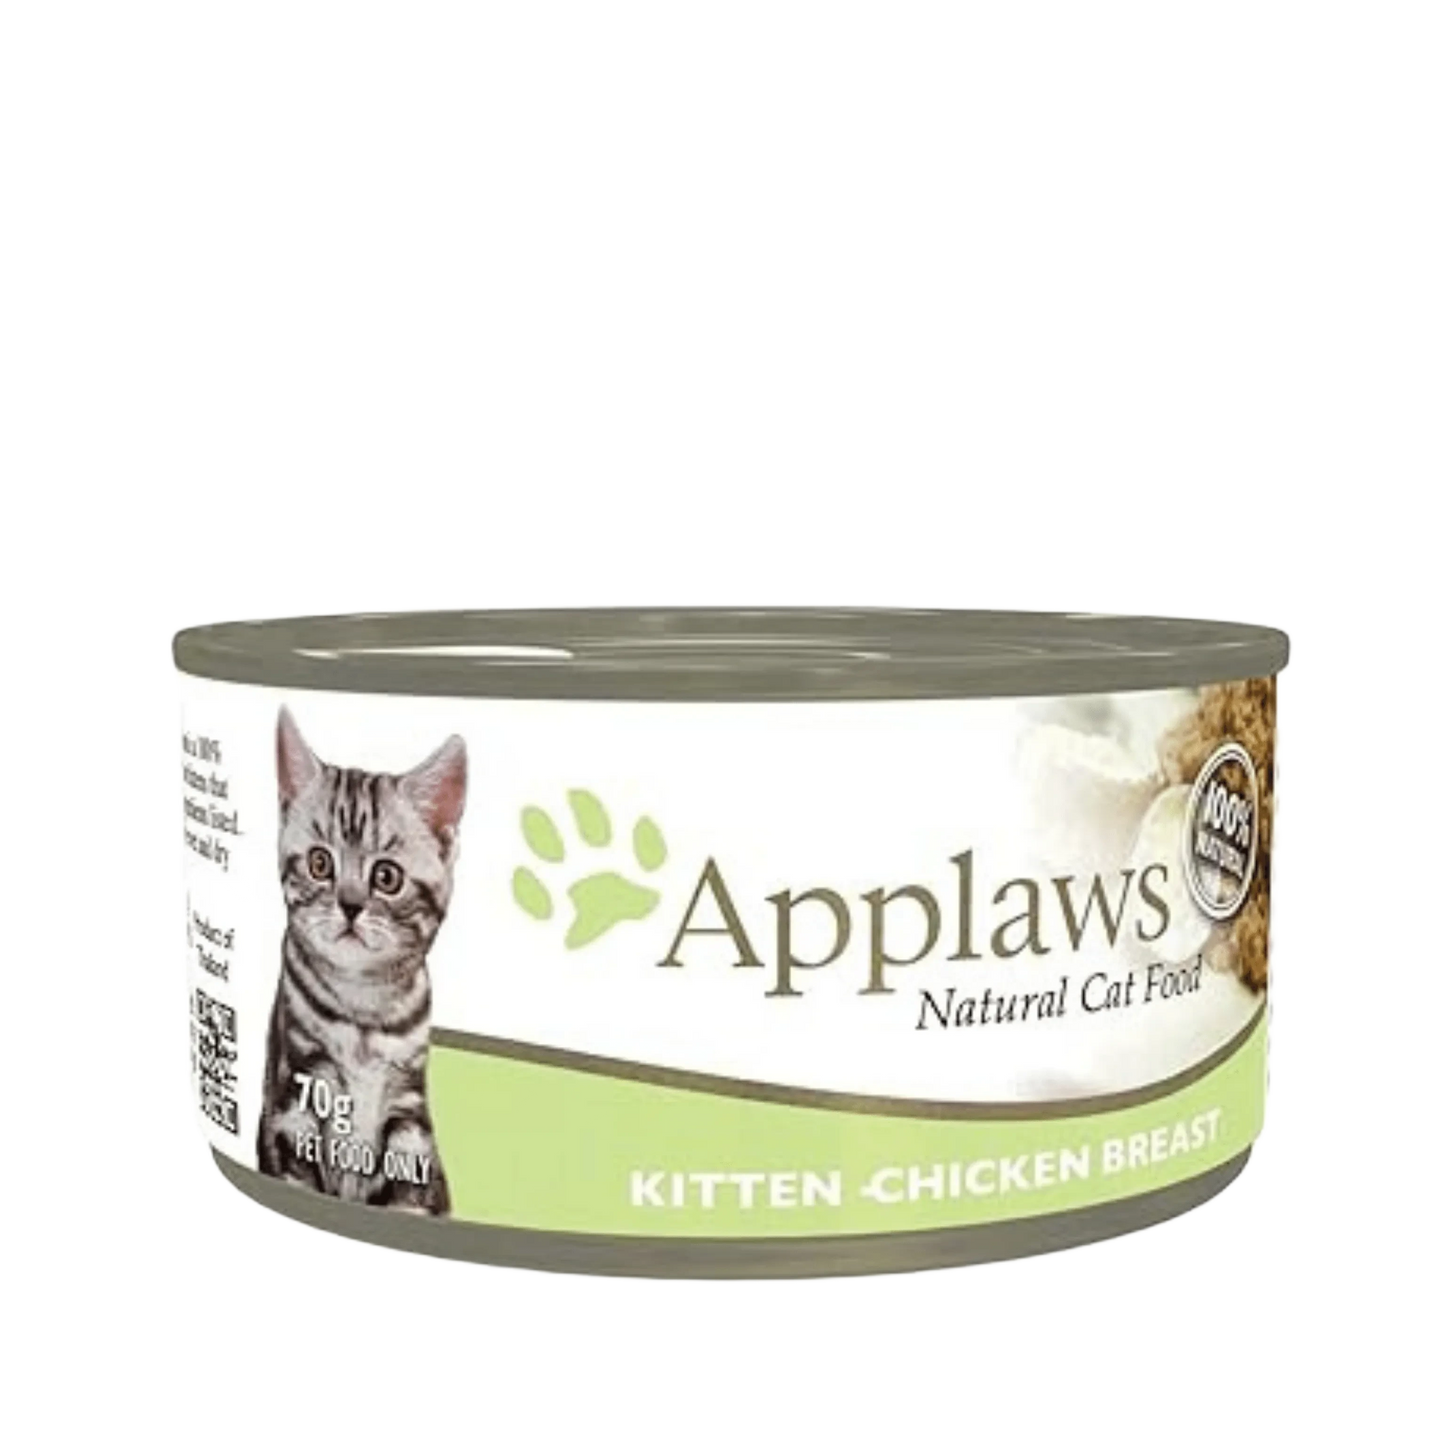 APPLAWS KITTEN CHICK BREAST CAN